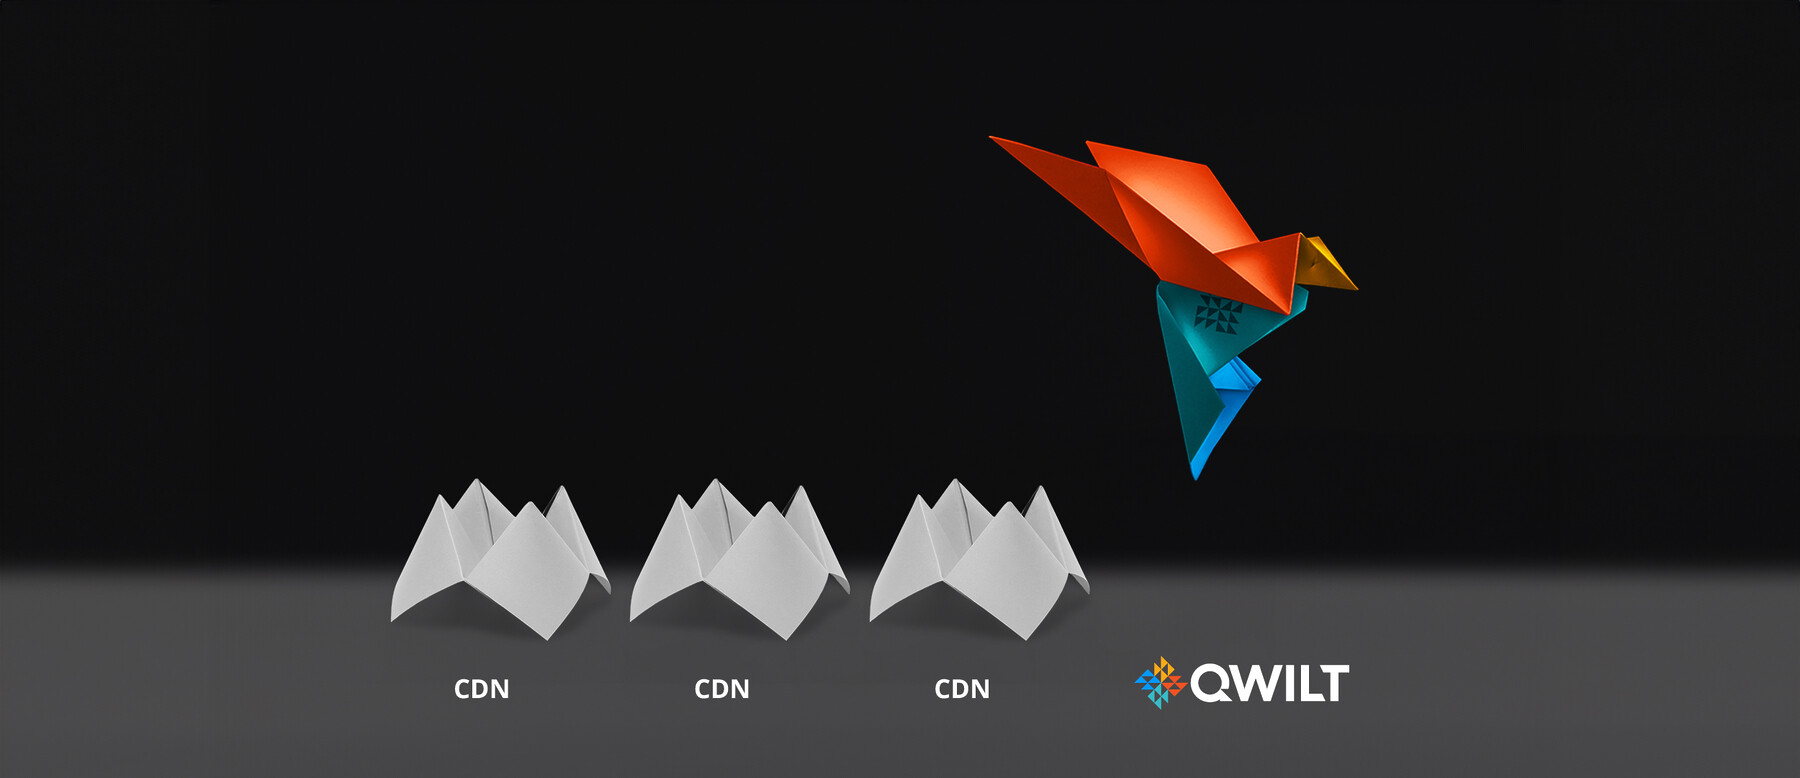 Qwilt’s all-edge network outperforms all other CDNs